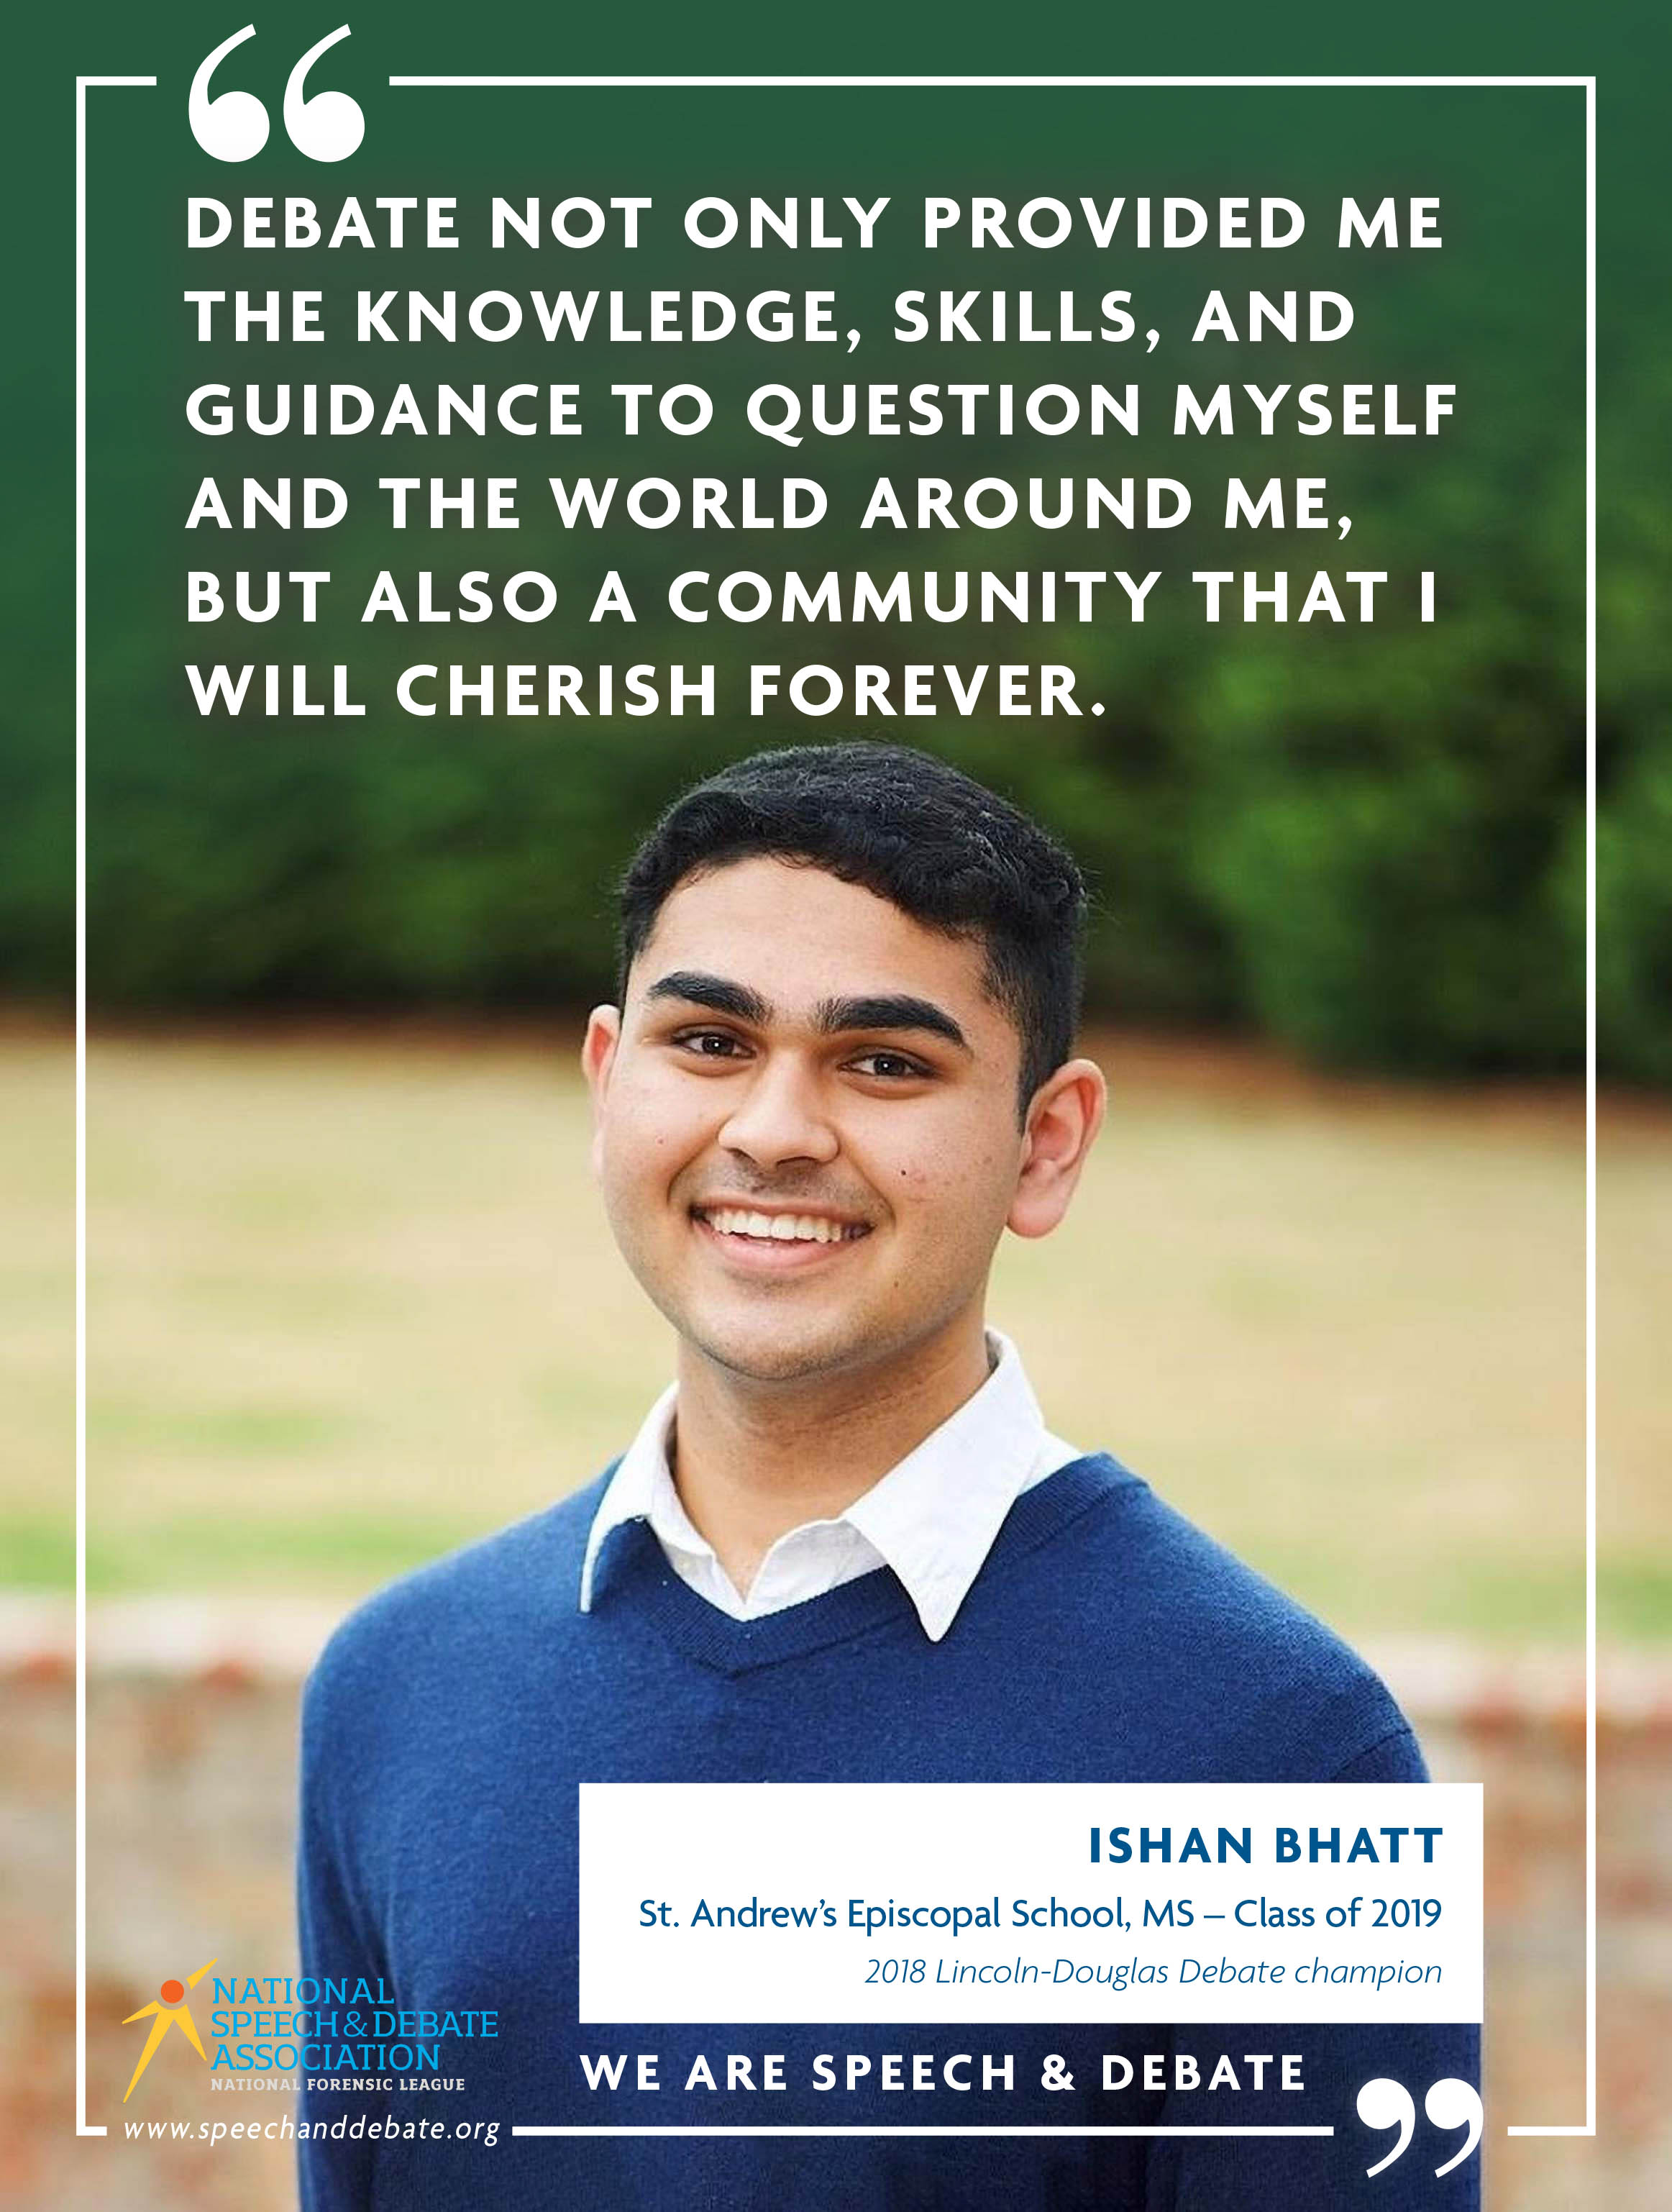 DEBATE NOT ONLY PROVIDED ME THE KNOWLEDGE, SKILLS, AND GUIDANCE TO QUESTION MYSELF AND THE WORLD AROUND ME, BUT ALSO A COMMUNITY THAT I WILL CHERISH FOREVER. - Ishan Bhatt